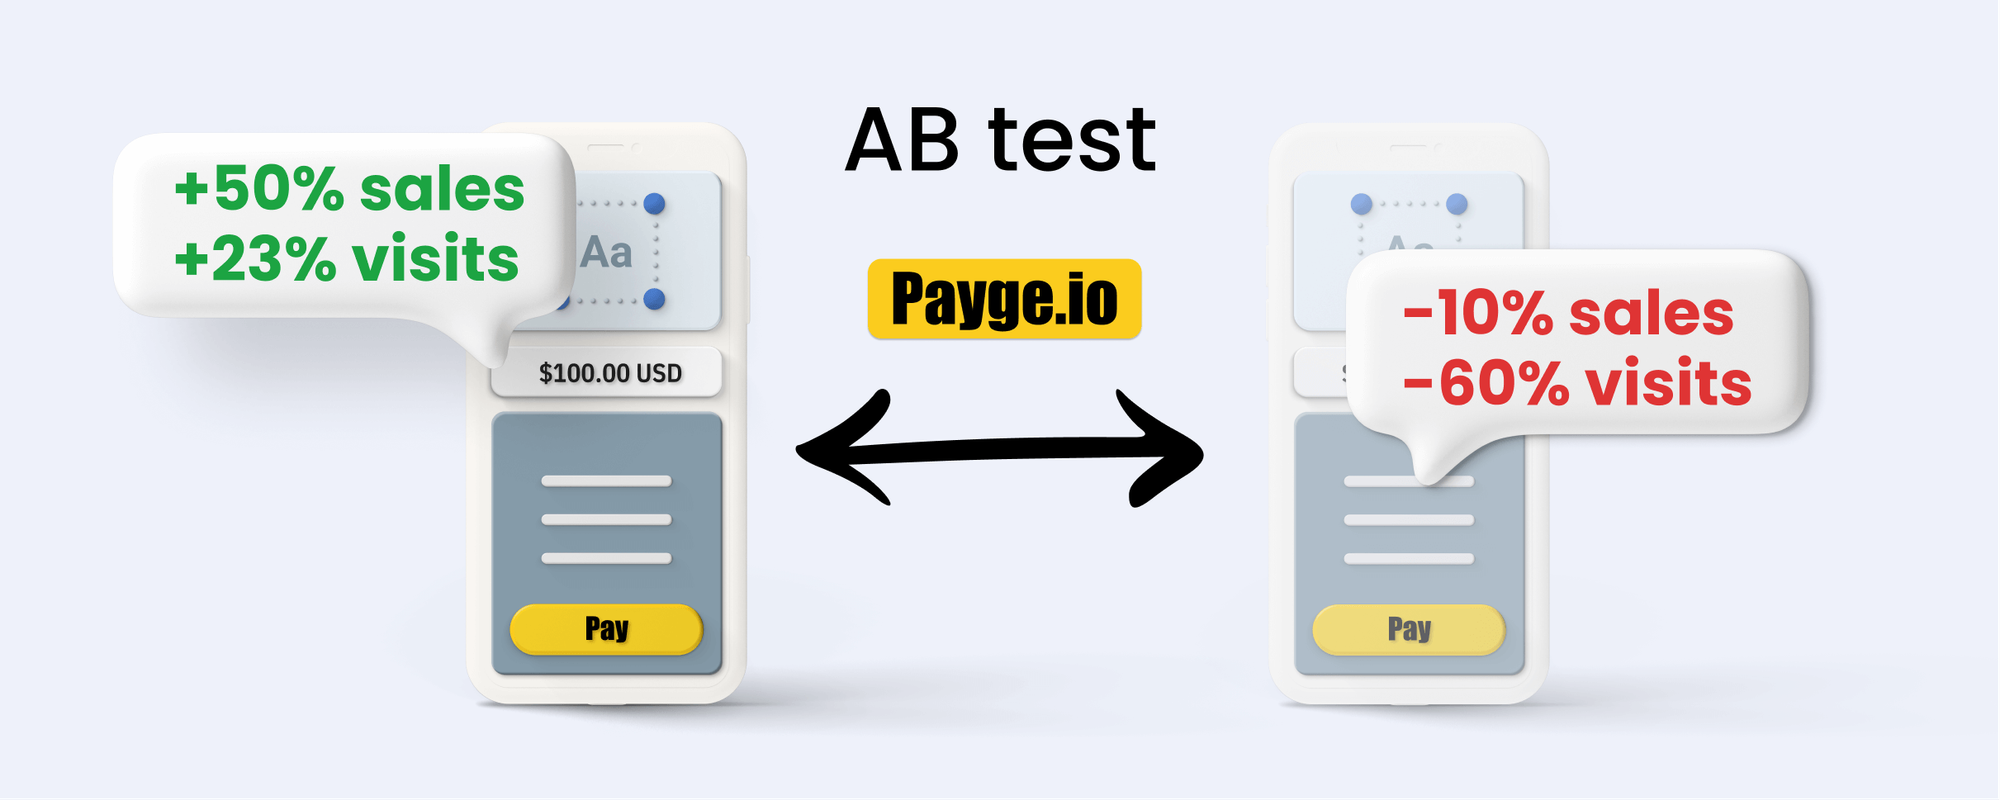 AB test example with payge.io payment page